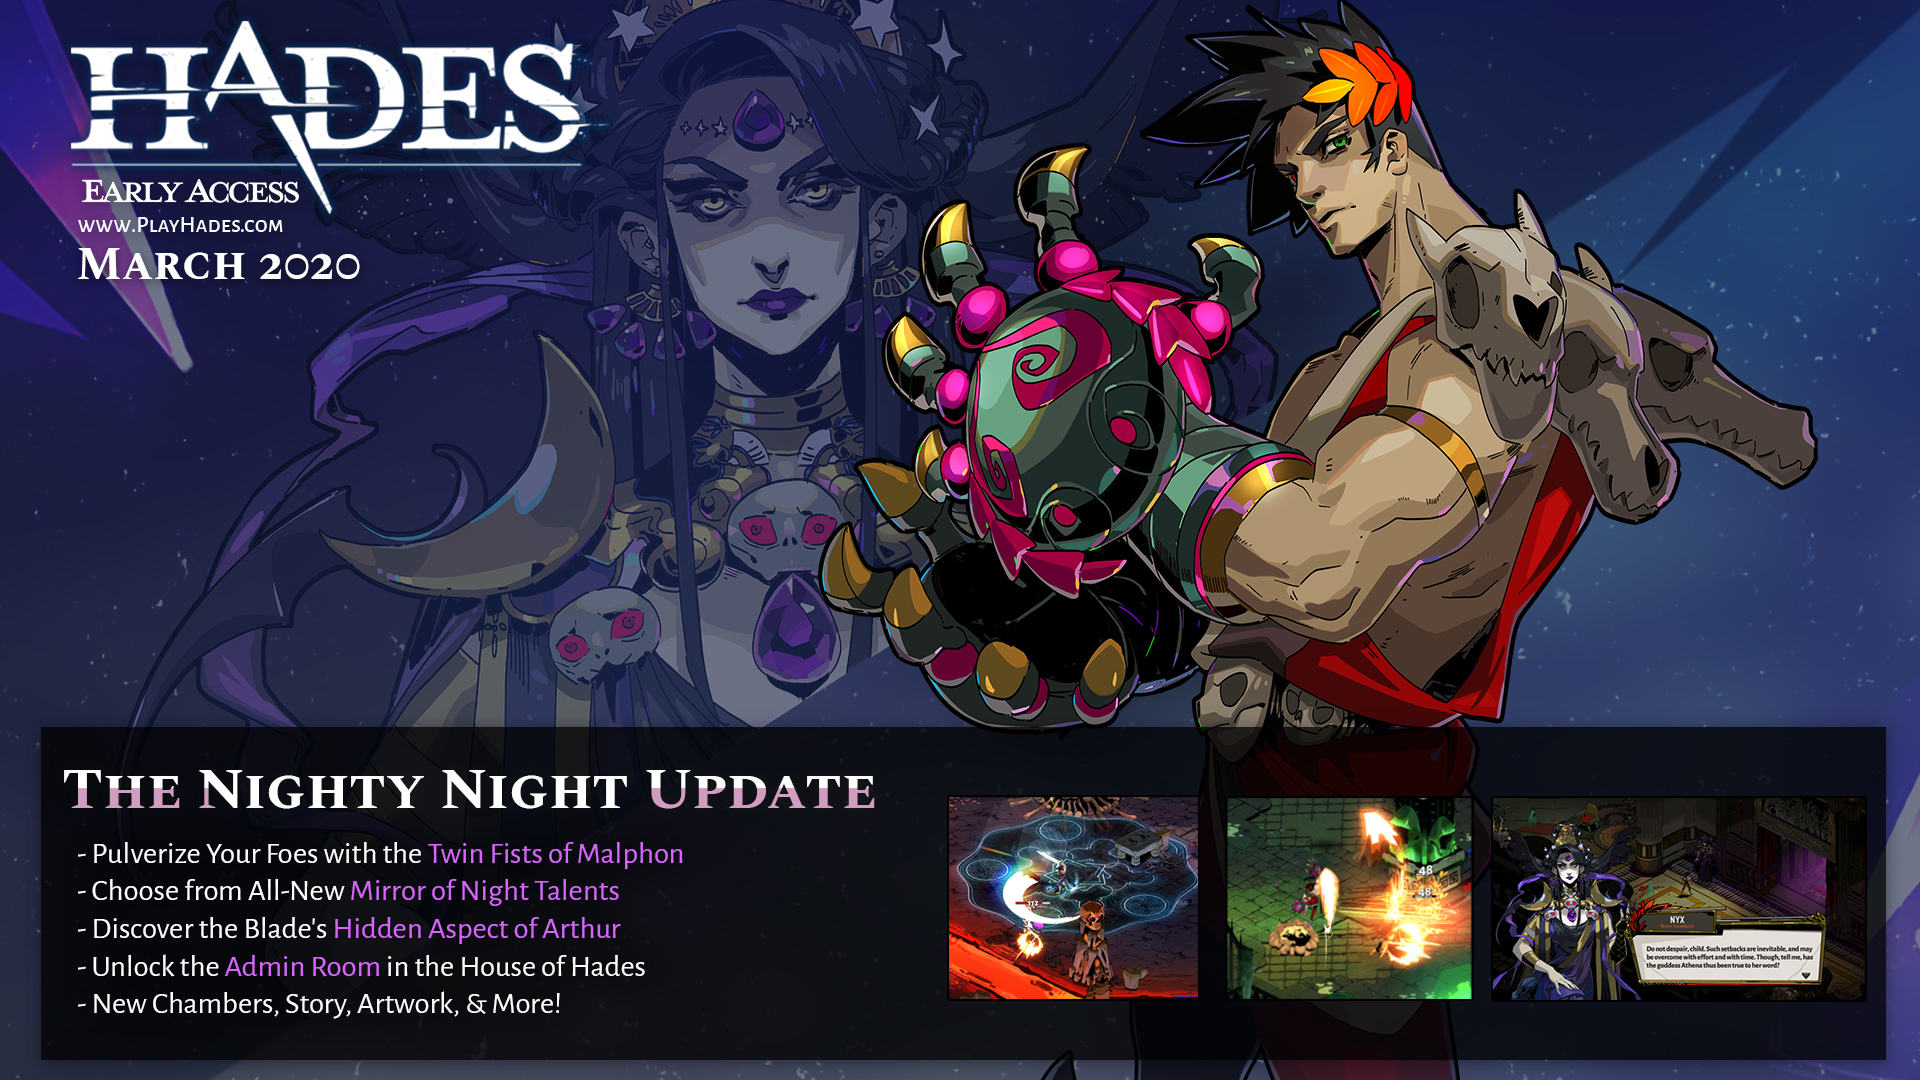 HADES 2 UPDATE!! When to expect Early Access and more